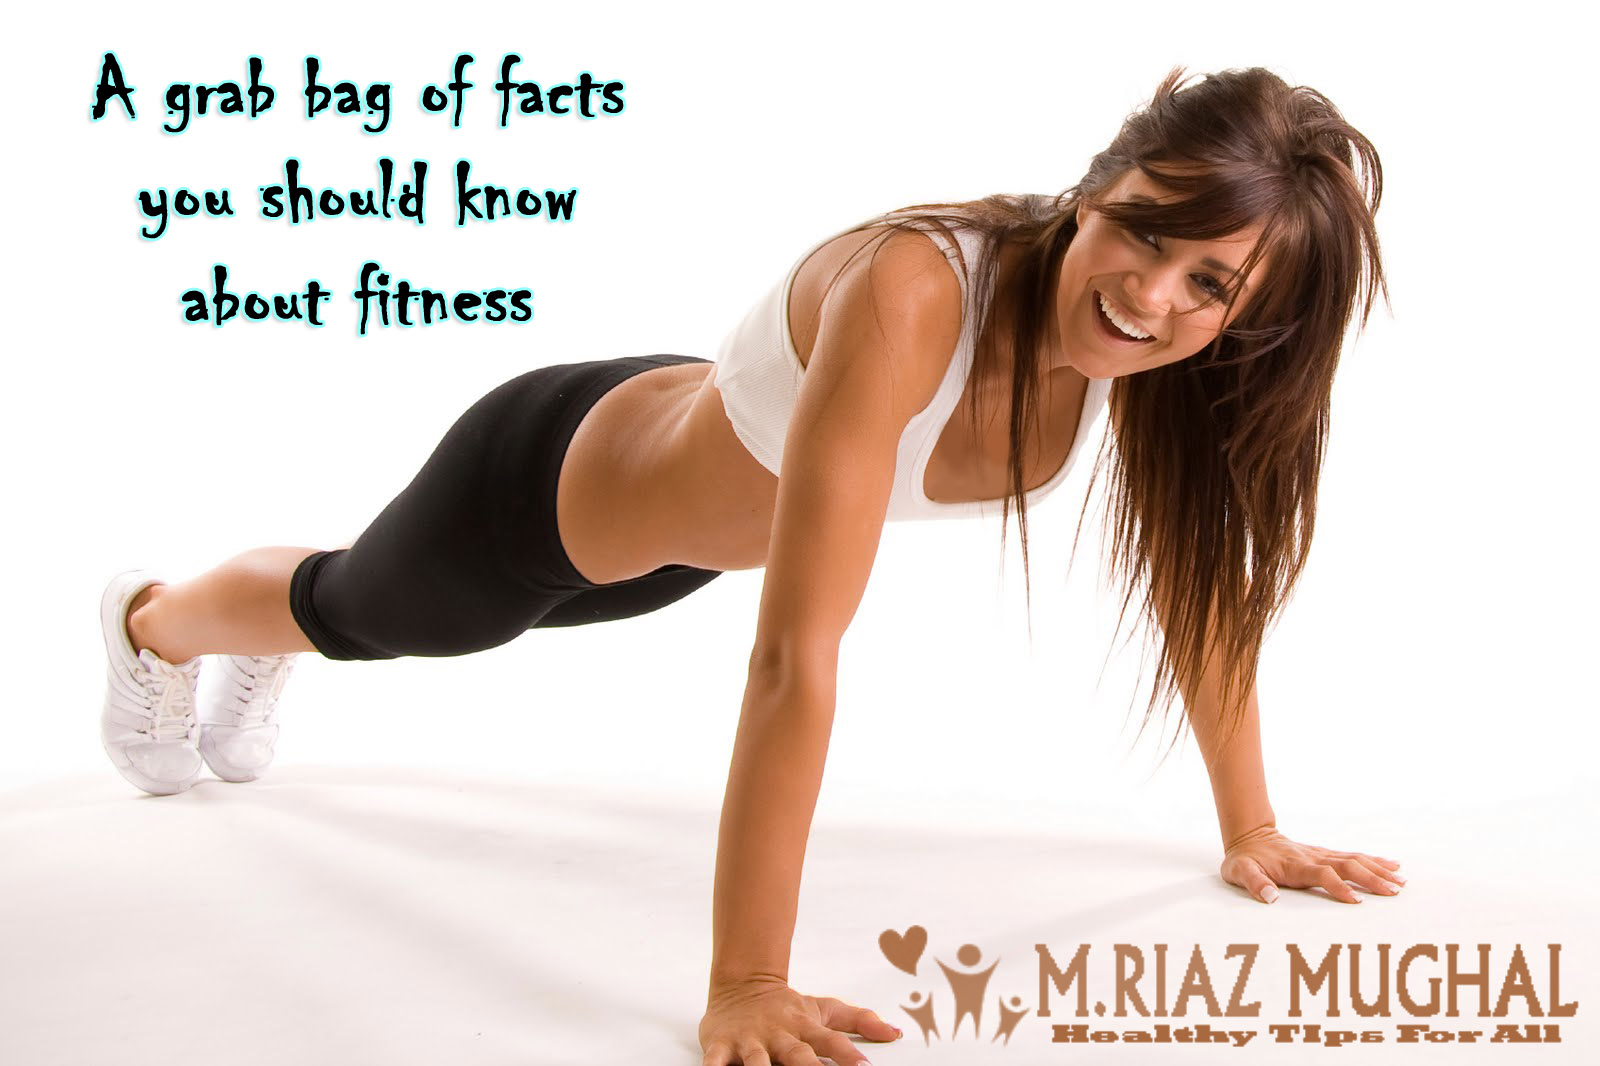 A grab bag of facts you should know about fitness